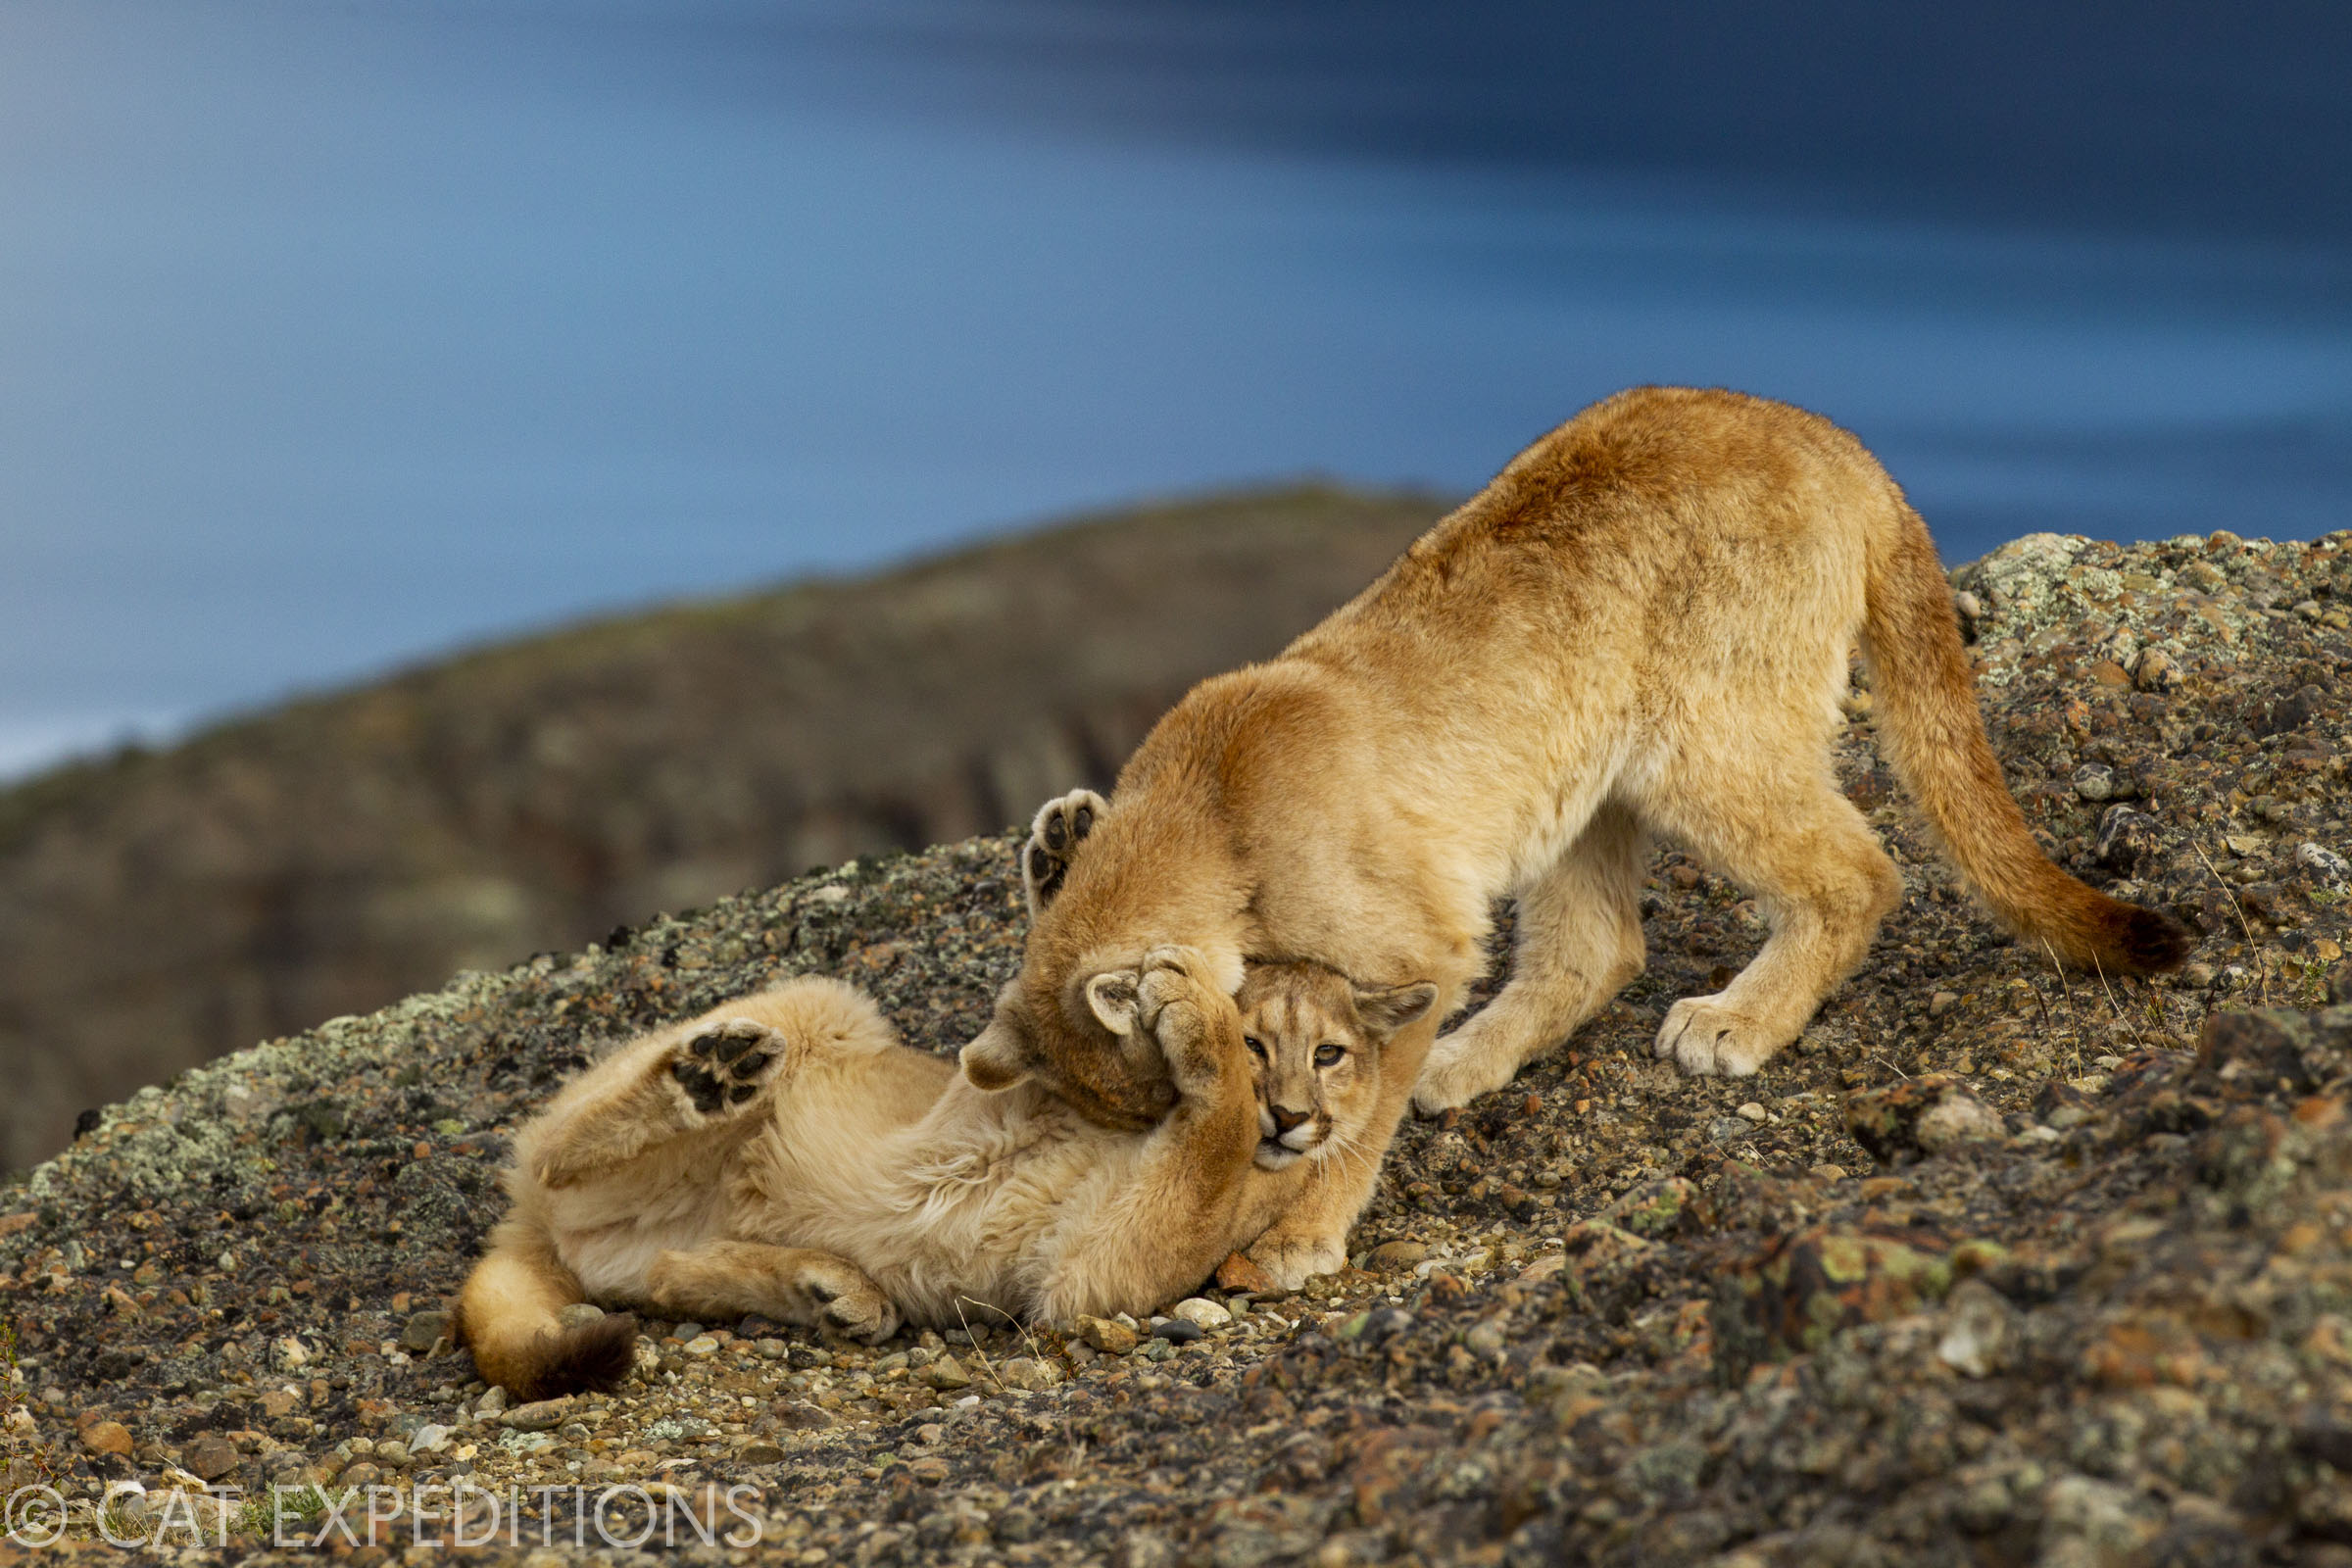 Ethical Puma Photo Tour | Cat Expeditions